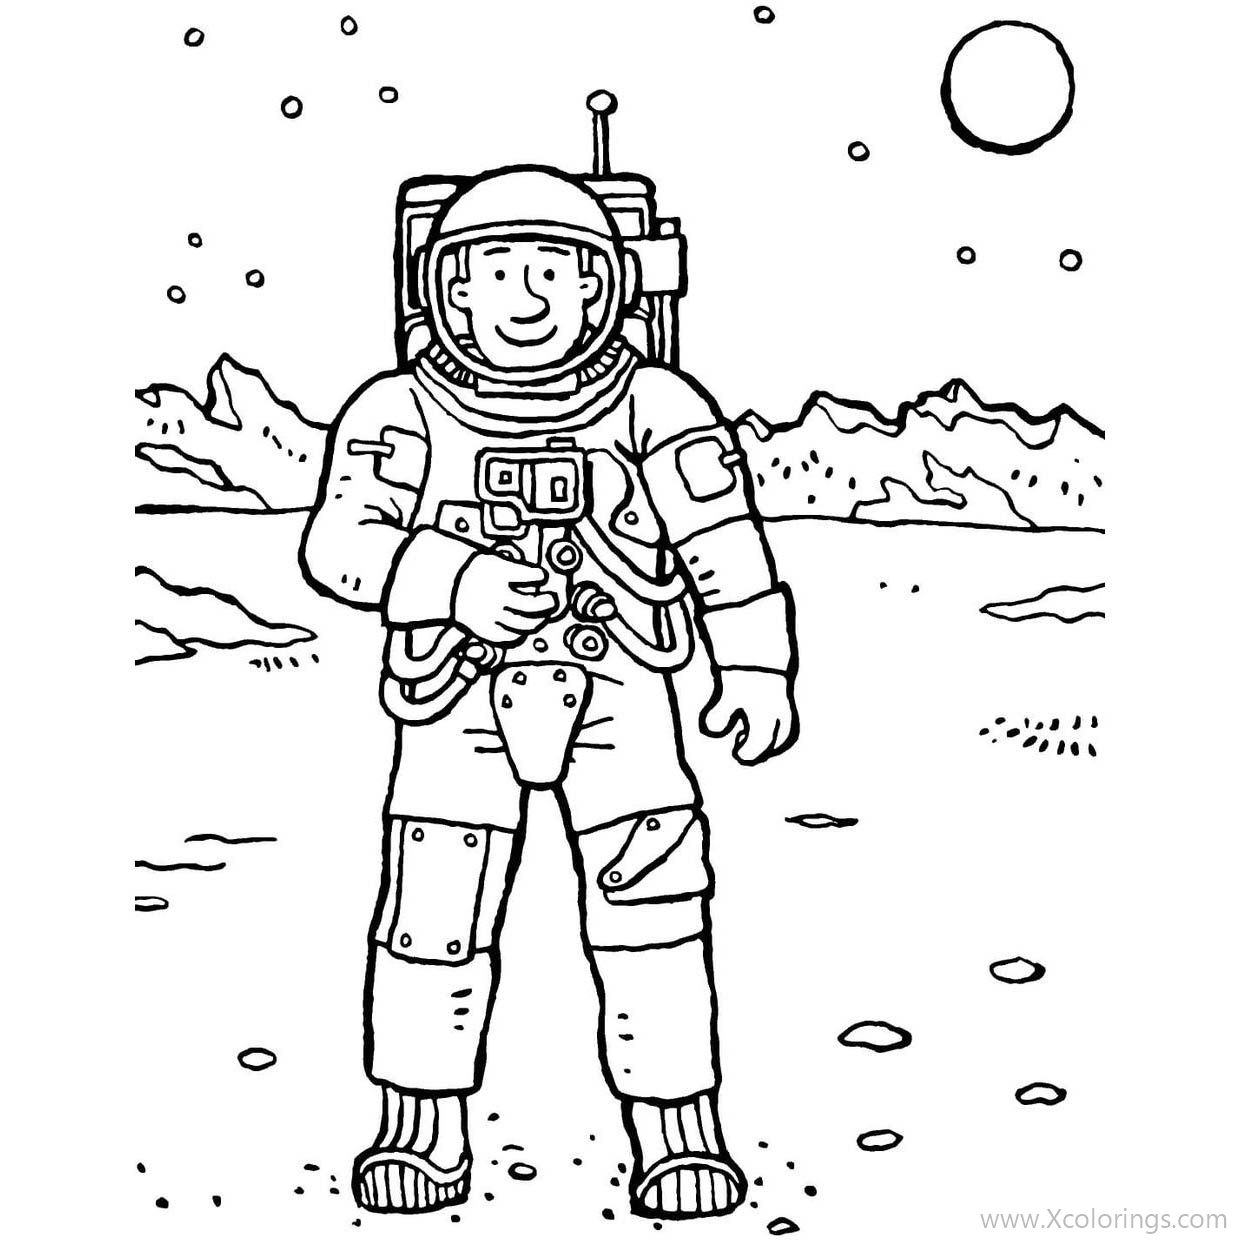 Free Astronaut Walking On the Planet Coloring Pages printable